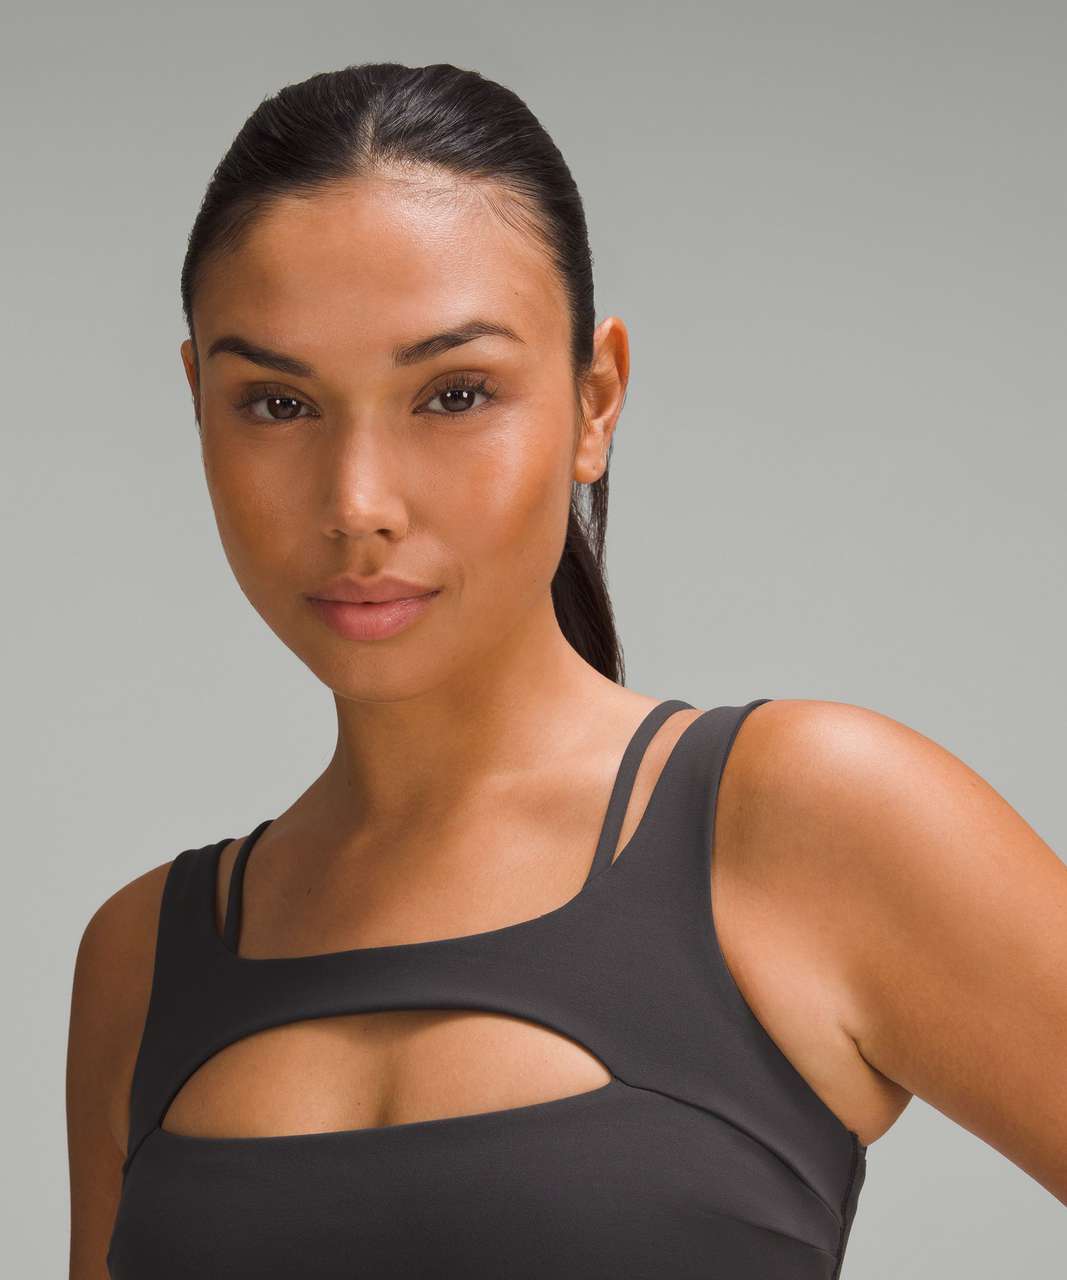 Lululemon Everlux Front Cut-Out Train Bra *Light Support, B/C Cup - Graphite Grey